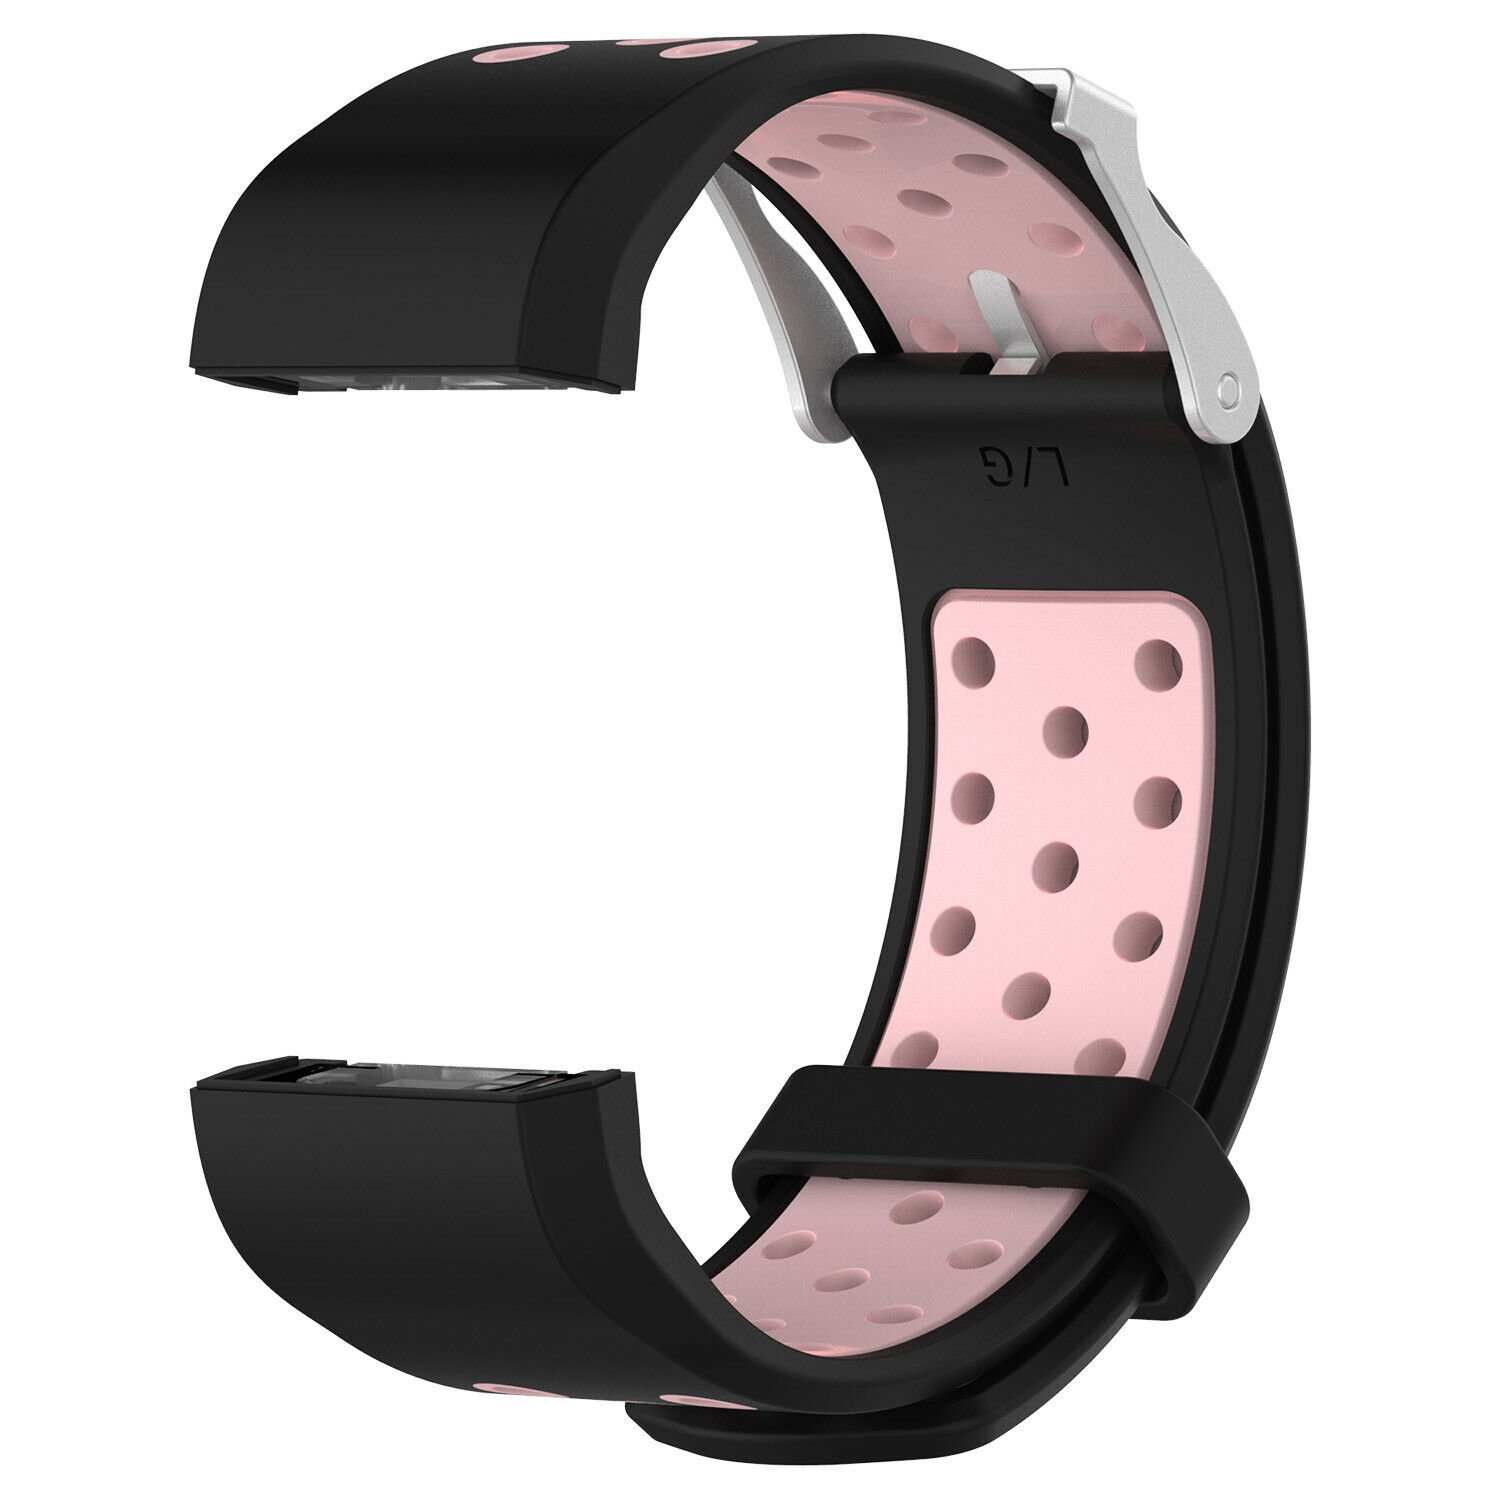 Replacement Silicone Sports Strap Wrist Band Bracelet For Fitbit Charge ...